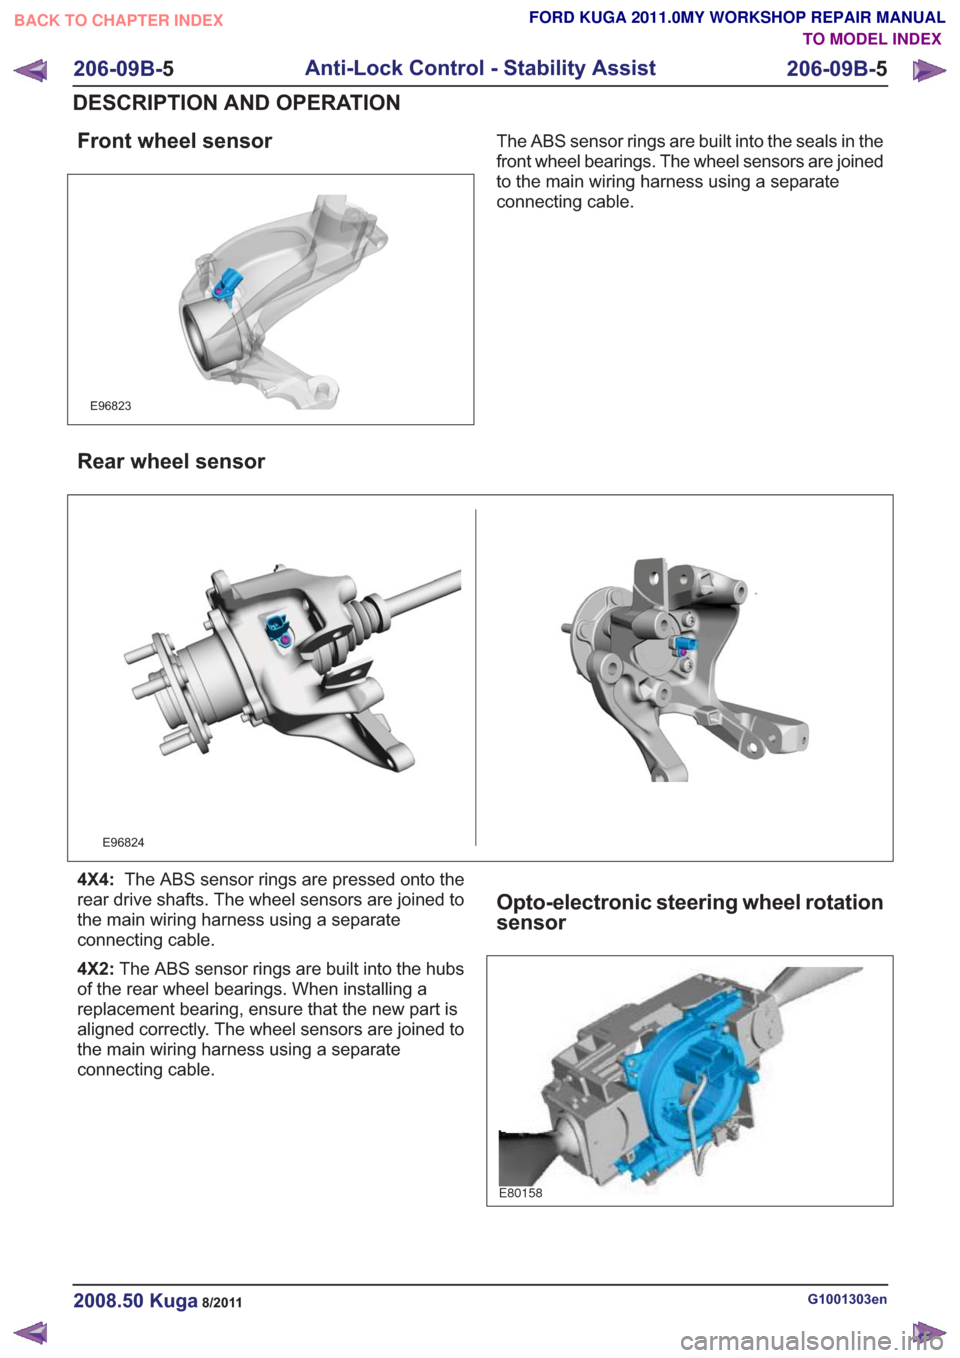 FORD KUGA 2011 1.G Service Manual Front wheel sensor
E96823
The ABS sensor rings are built into the seals in the
front wheel bearings. The wheel sensors are joined
to the main wiring harness using a separate
connecting cable.
Rear whe